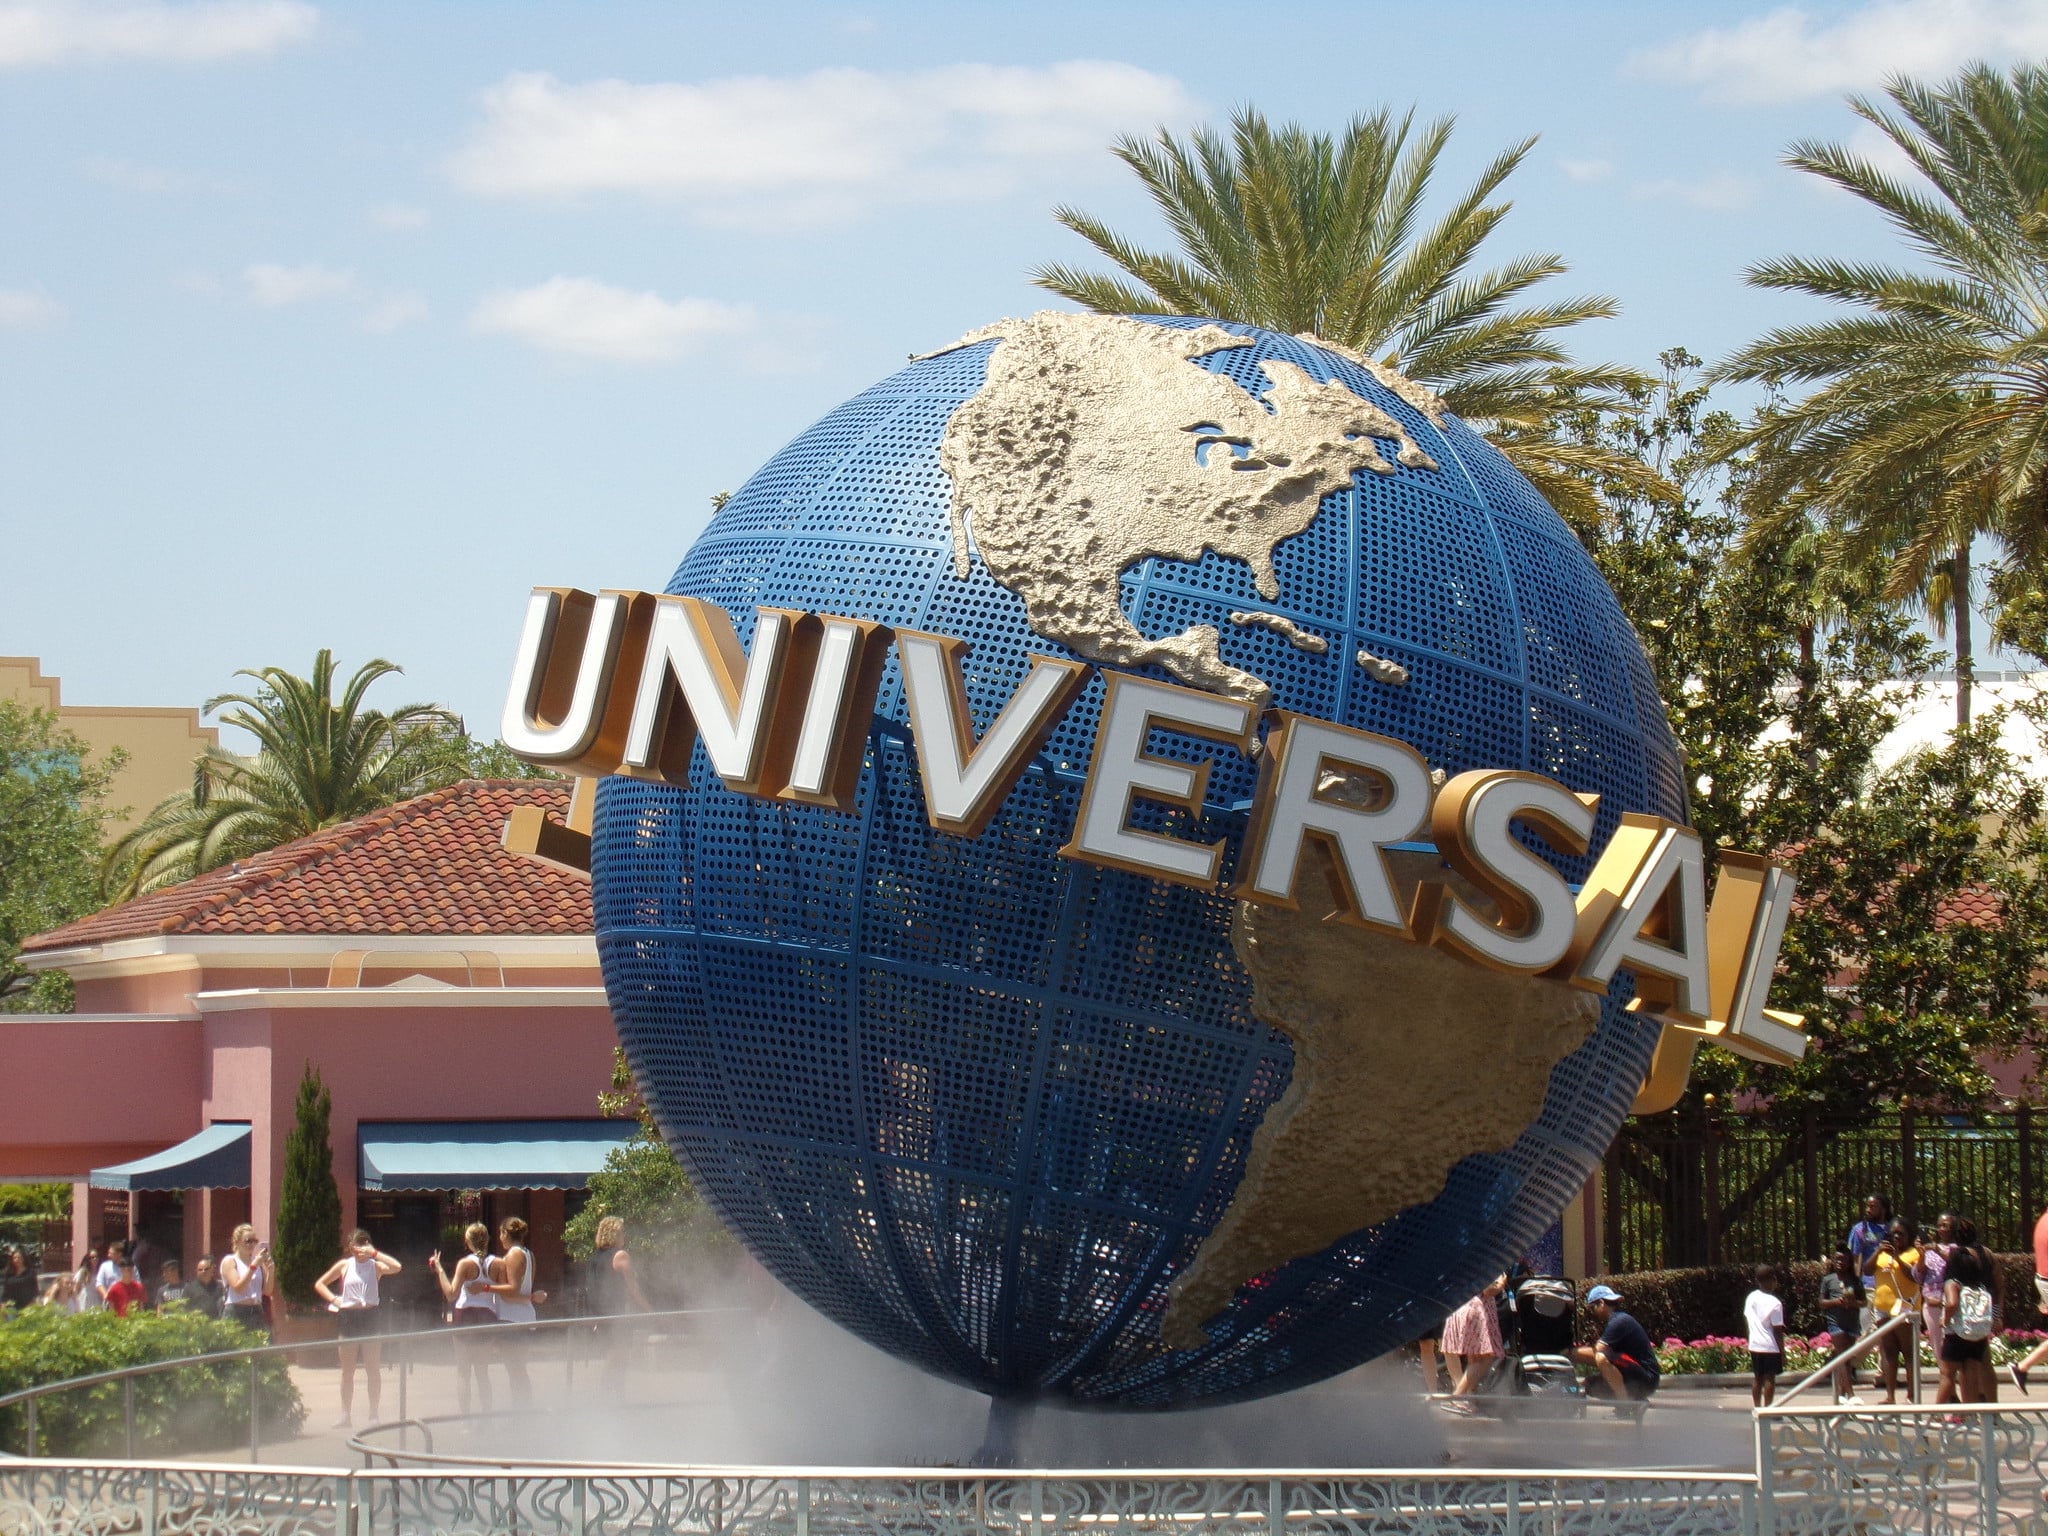 Universal Studios Orlando in just one day